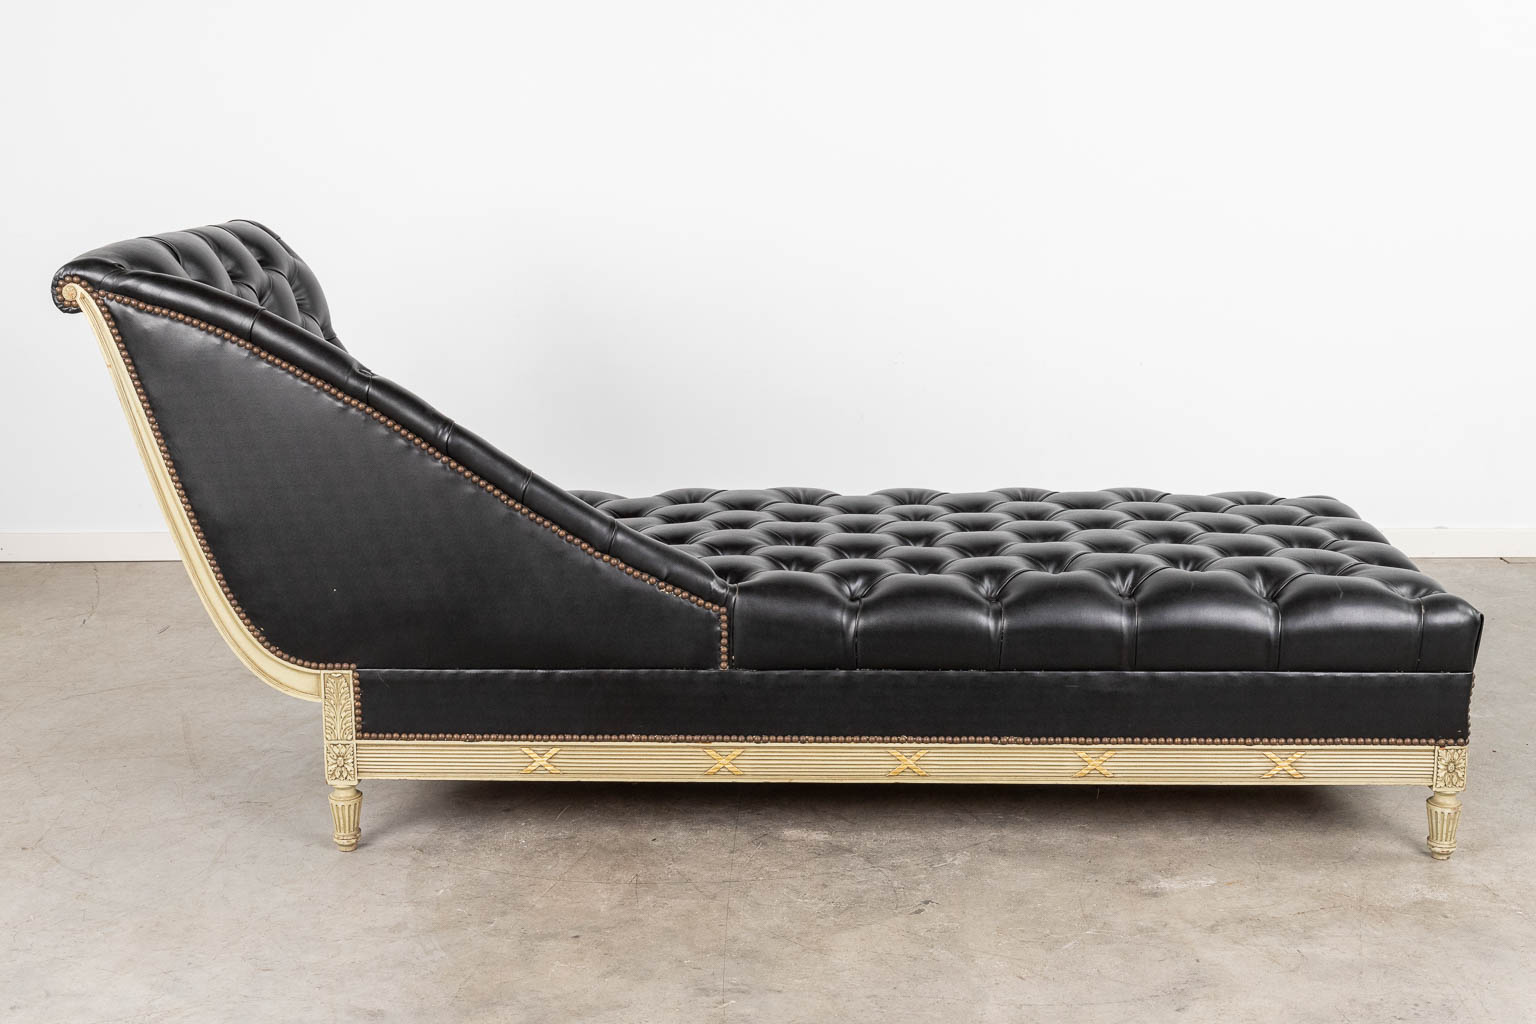 A white-patinated 'Chaise Longue', wood and leather in Louis XVI style. (L:76 x W:200 x H:87 cm) - Image 5 of 12